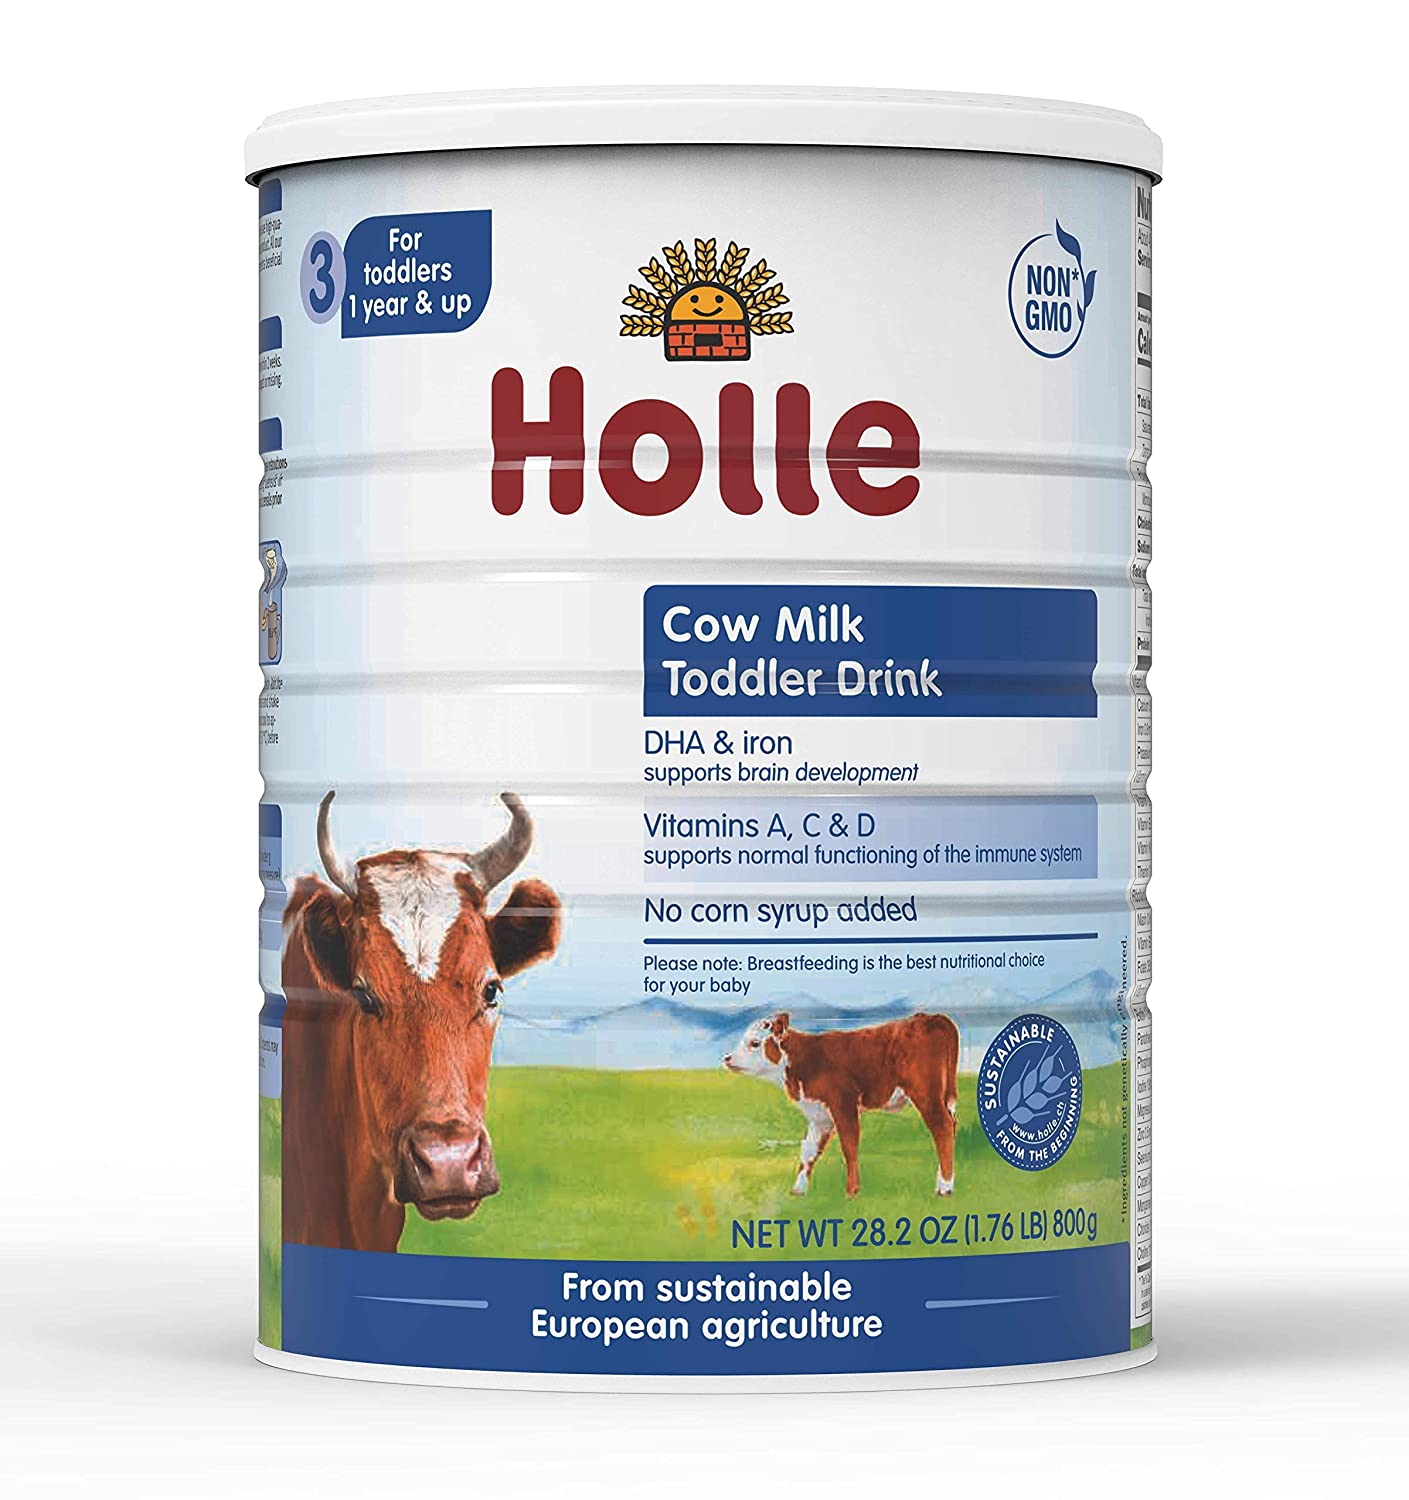 Holle社Non-GMO European Whole Milk Toddler Drink with DHA for Healthy Brain Development 1 Year & Up 800g入り